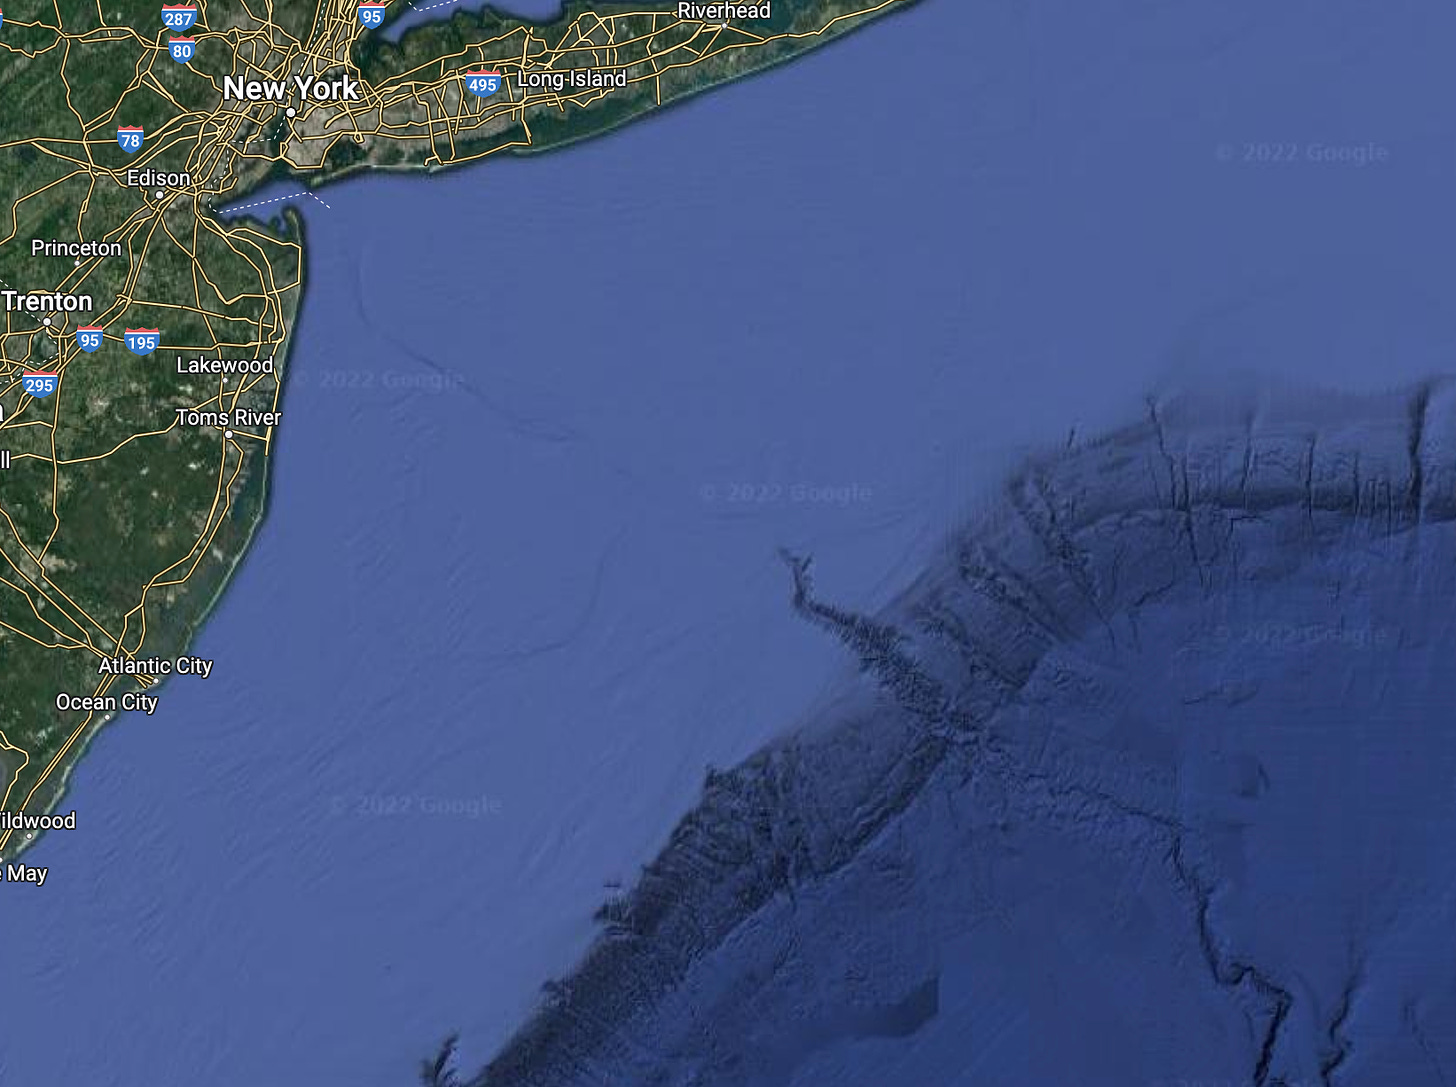 a screenshot from google maps showing new jersey and long island at the top right, then the faint indent of the hudson shelf valley going down and to hte right until the center of the image where a deeper cut in the continental shelf appears, spanning all the way to the bottom right of the image